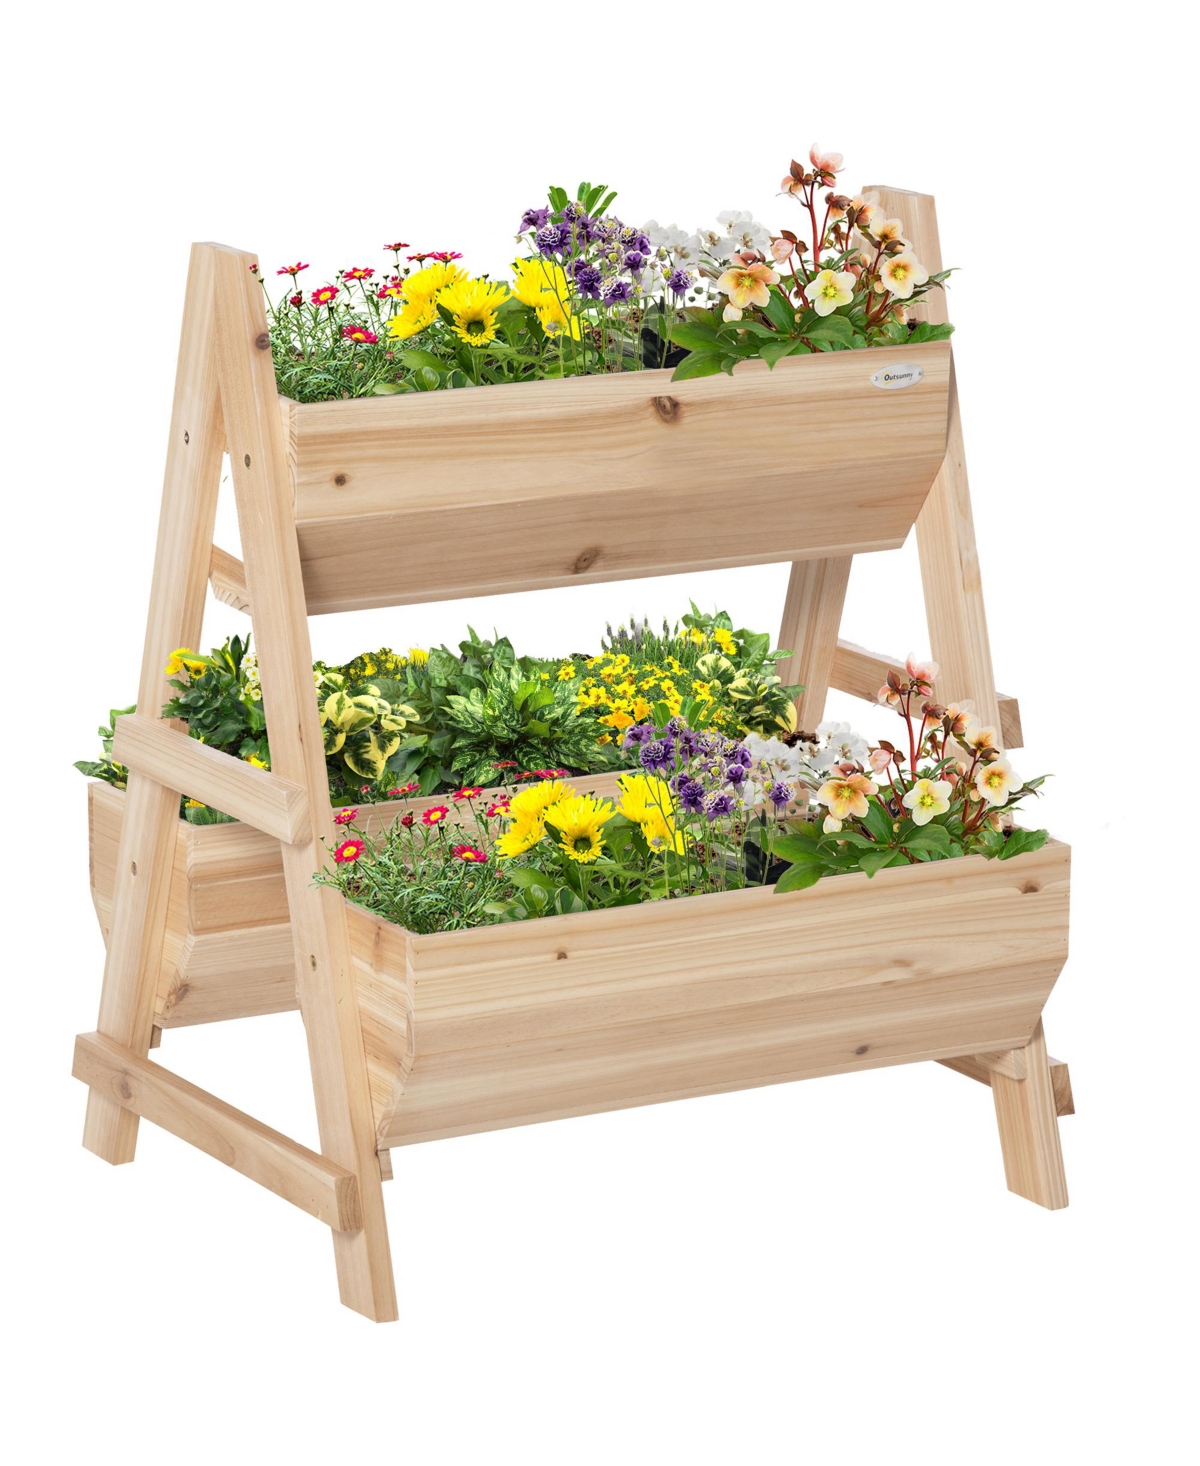 Raised Garden Bed A-shaped Wooden Planter Box with Nonwoven Fabric - Natural